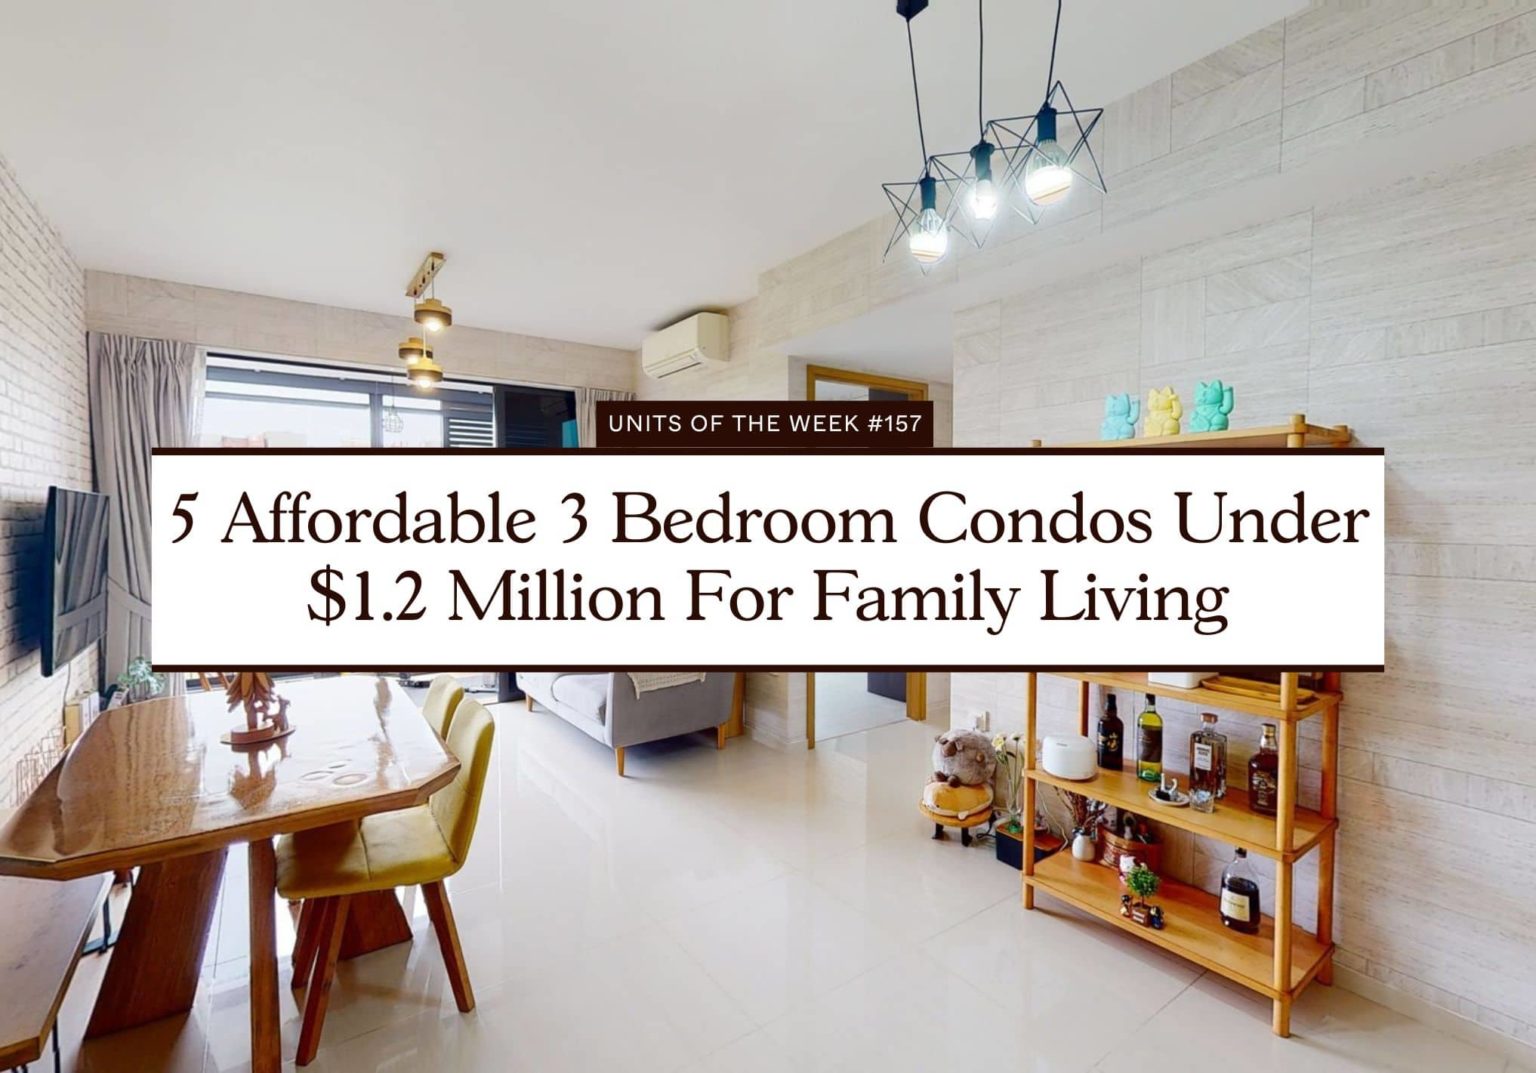 5 Affordable 3 Bedroom Condos Under 1.2 Million For Family Living